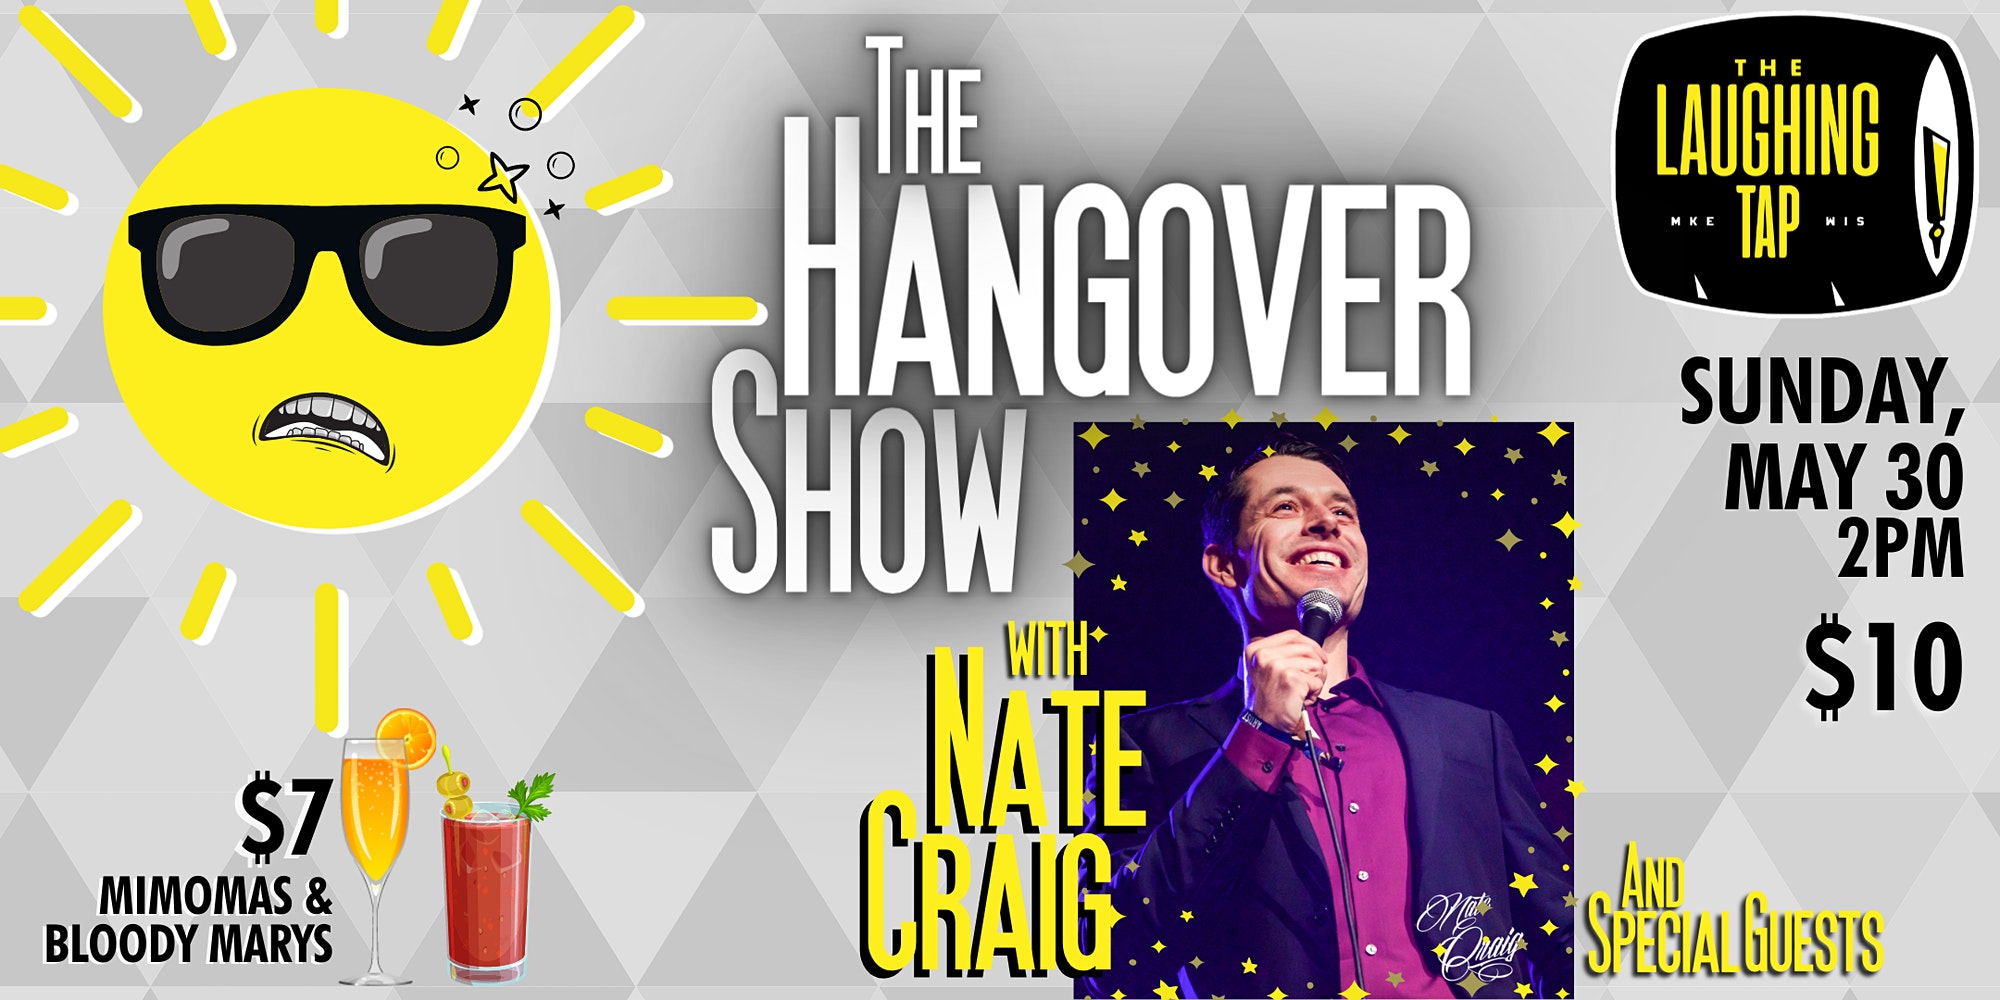 The Hangover Show At The Laughing Tap!!